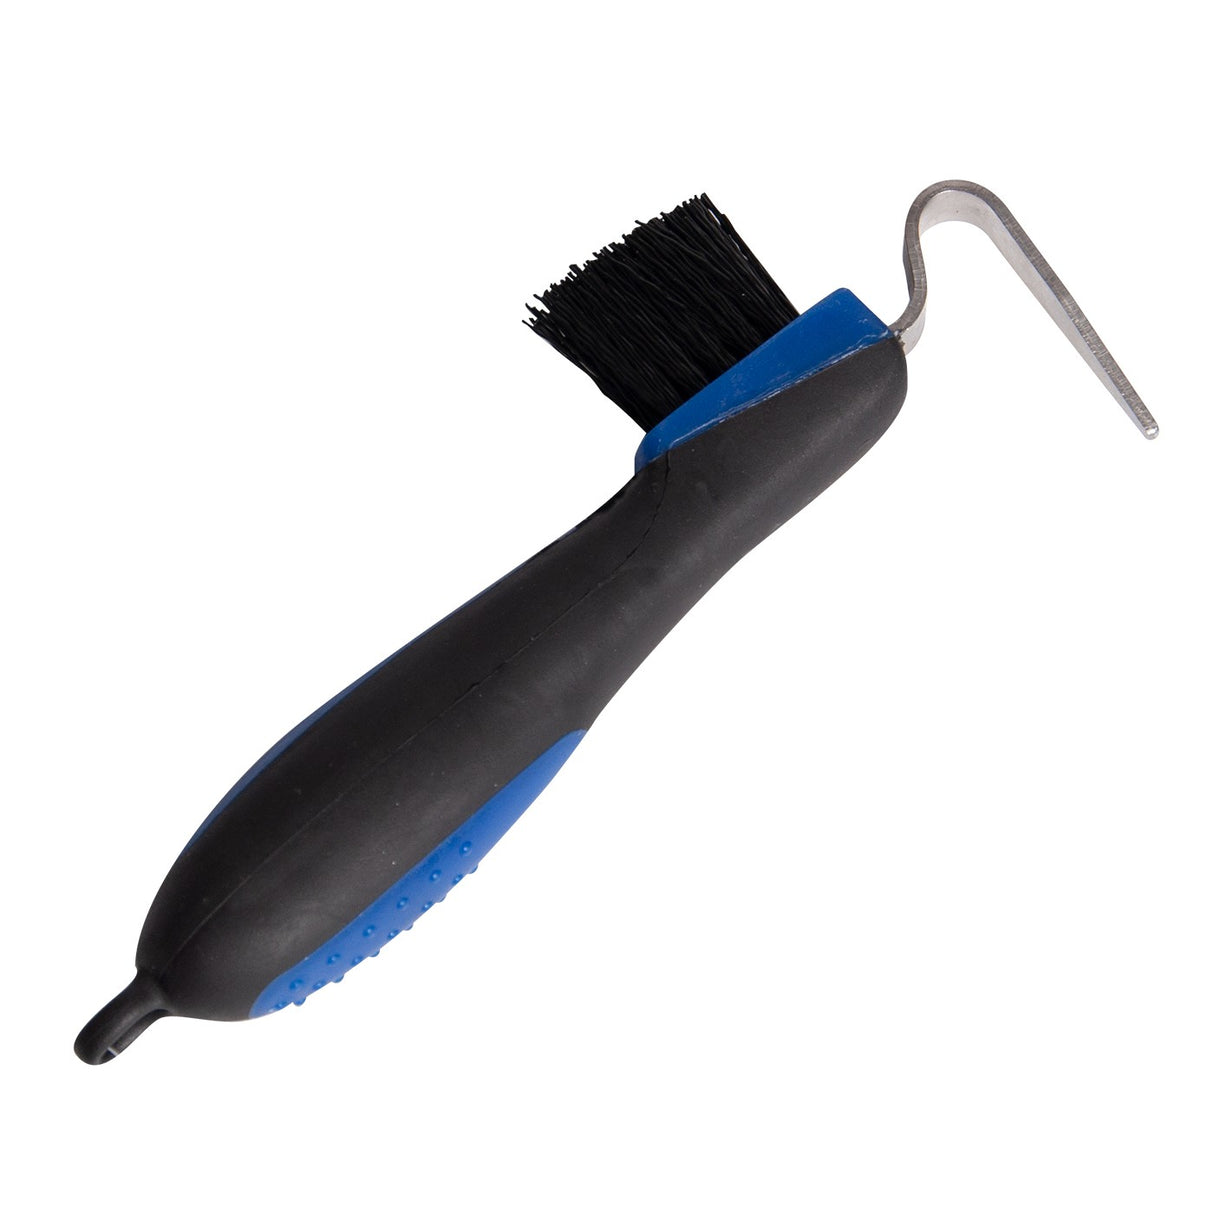 Cure-pied Supra Soft Touch avec brosse